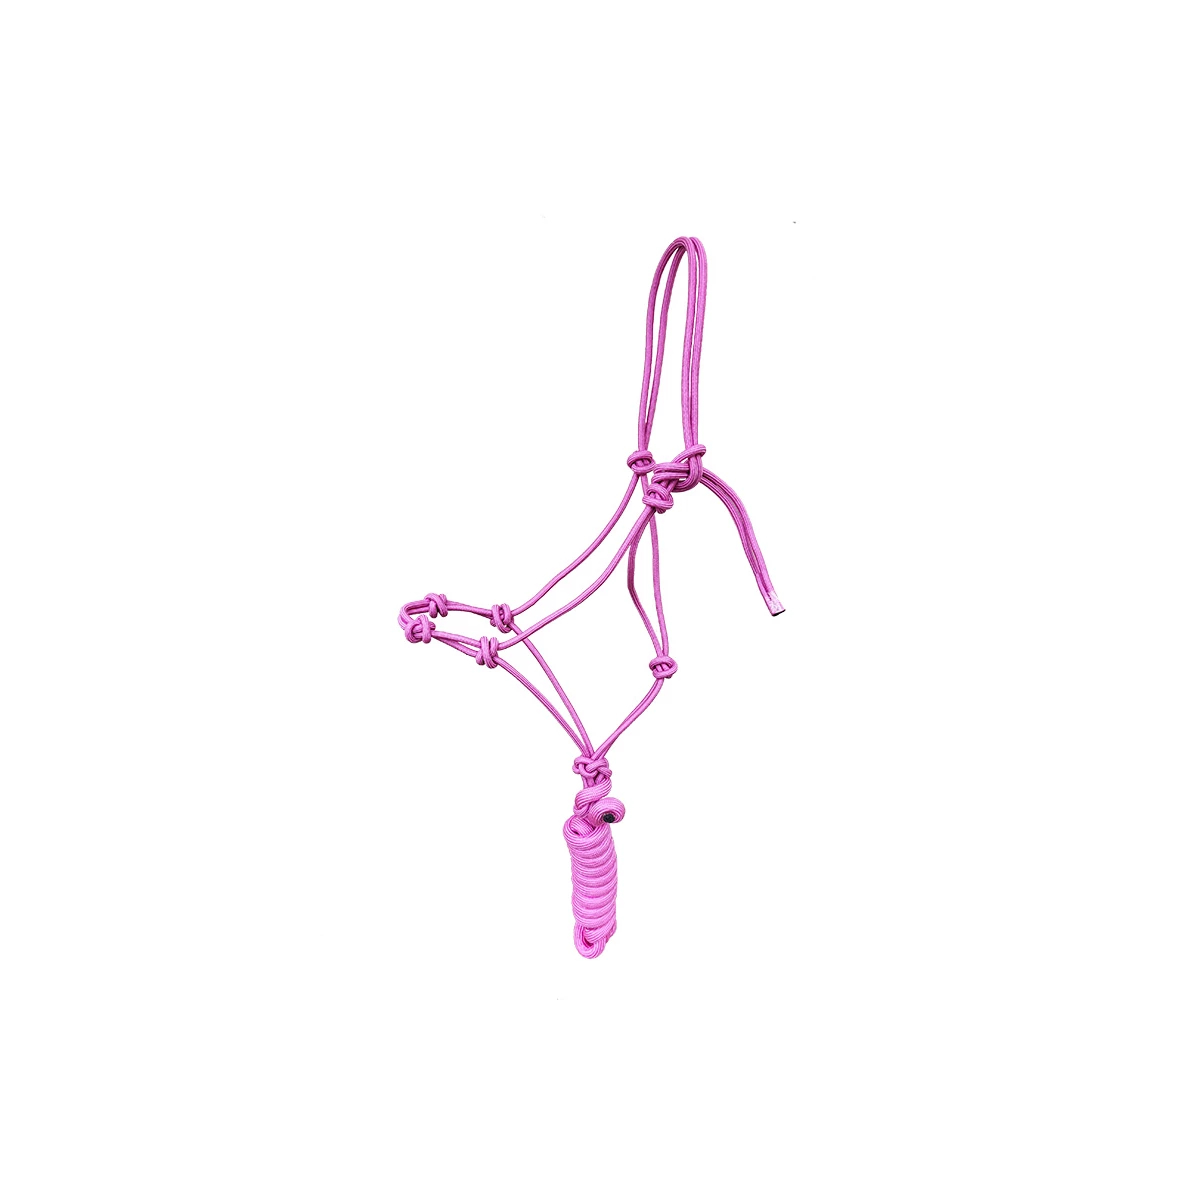 Knotted halter "4 knots" incl. rope 